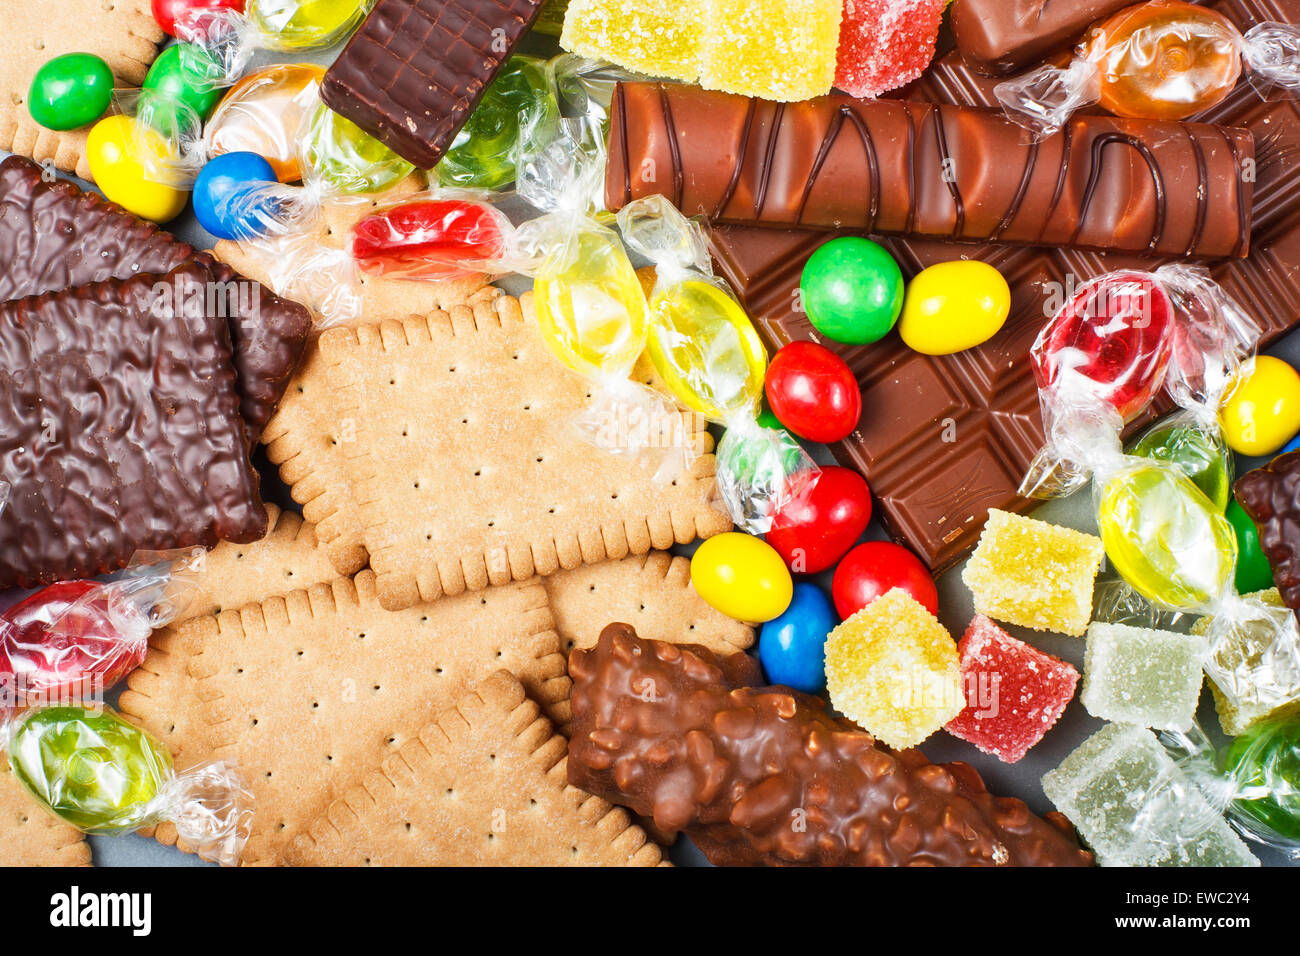 Food concept - candy, chocolate, candy bars, jelly Stock Photo